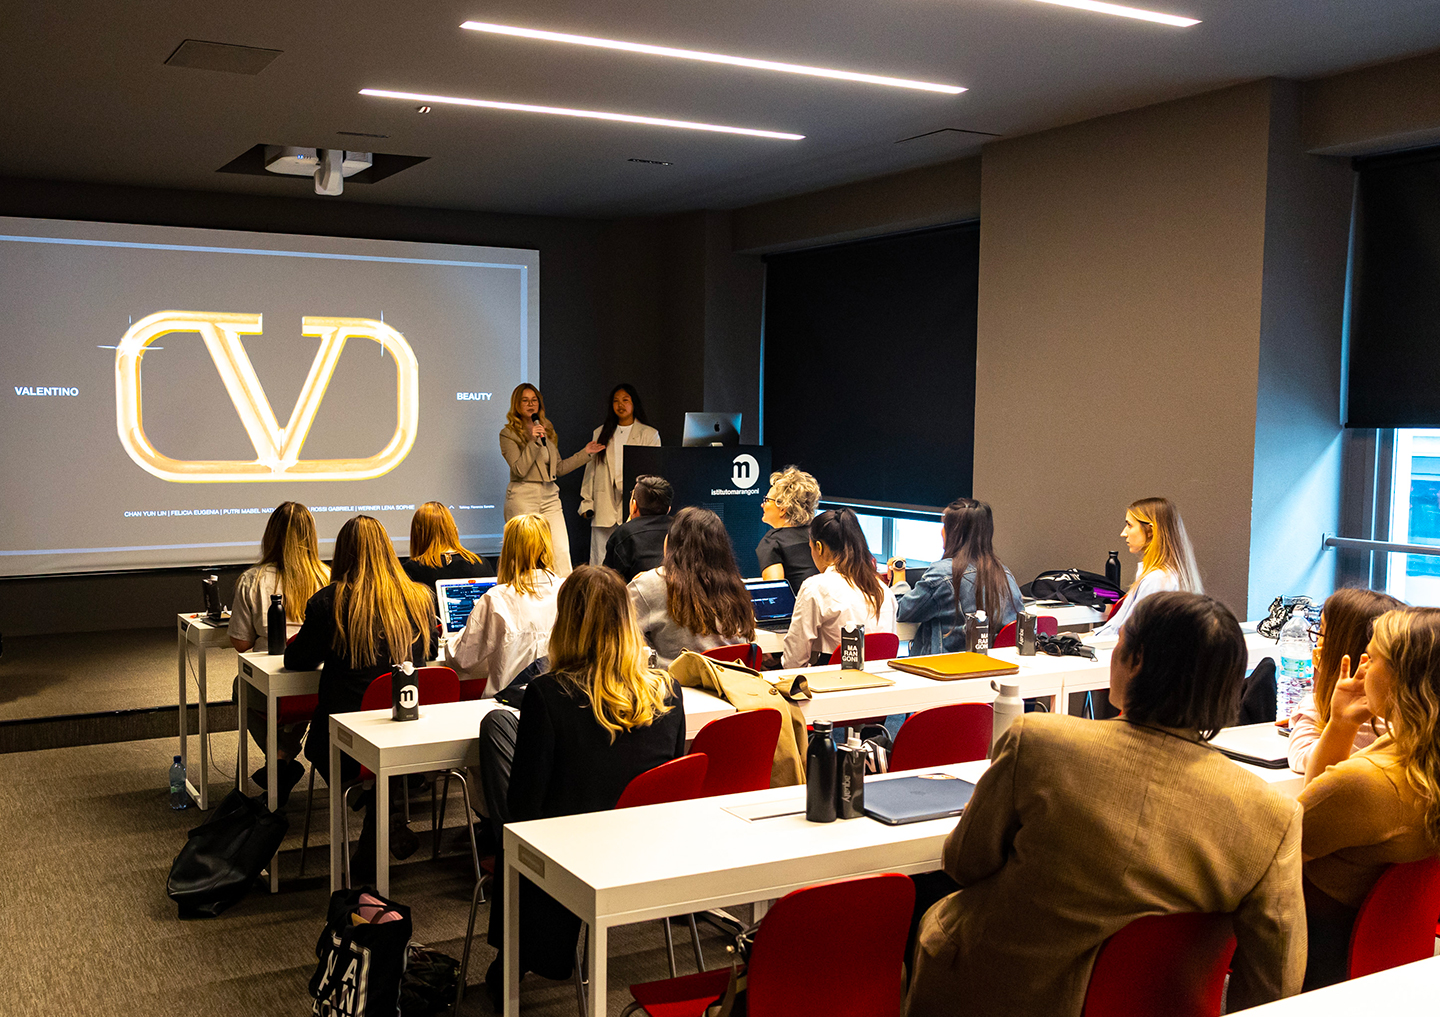 The main challenge for the students was to come up with projects to bring a historic, heritage-rich brand like Valentino to a fast-growing Asian market